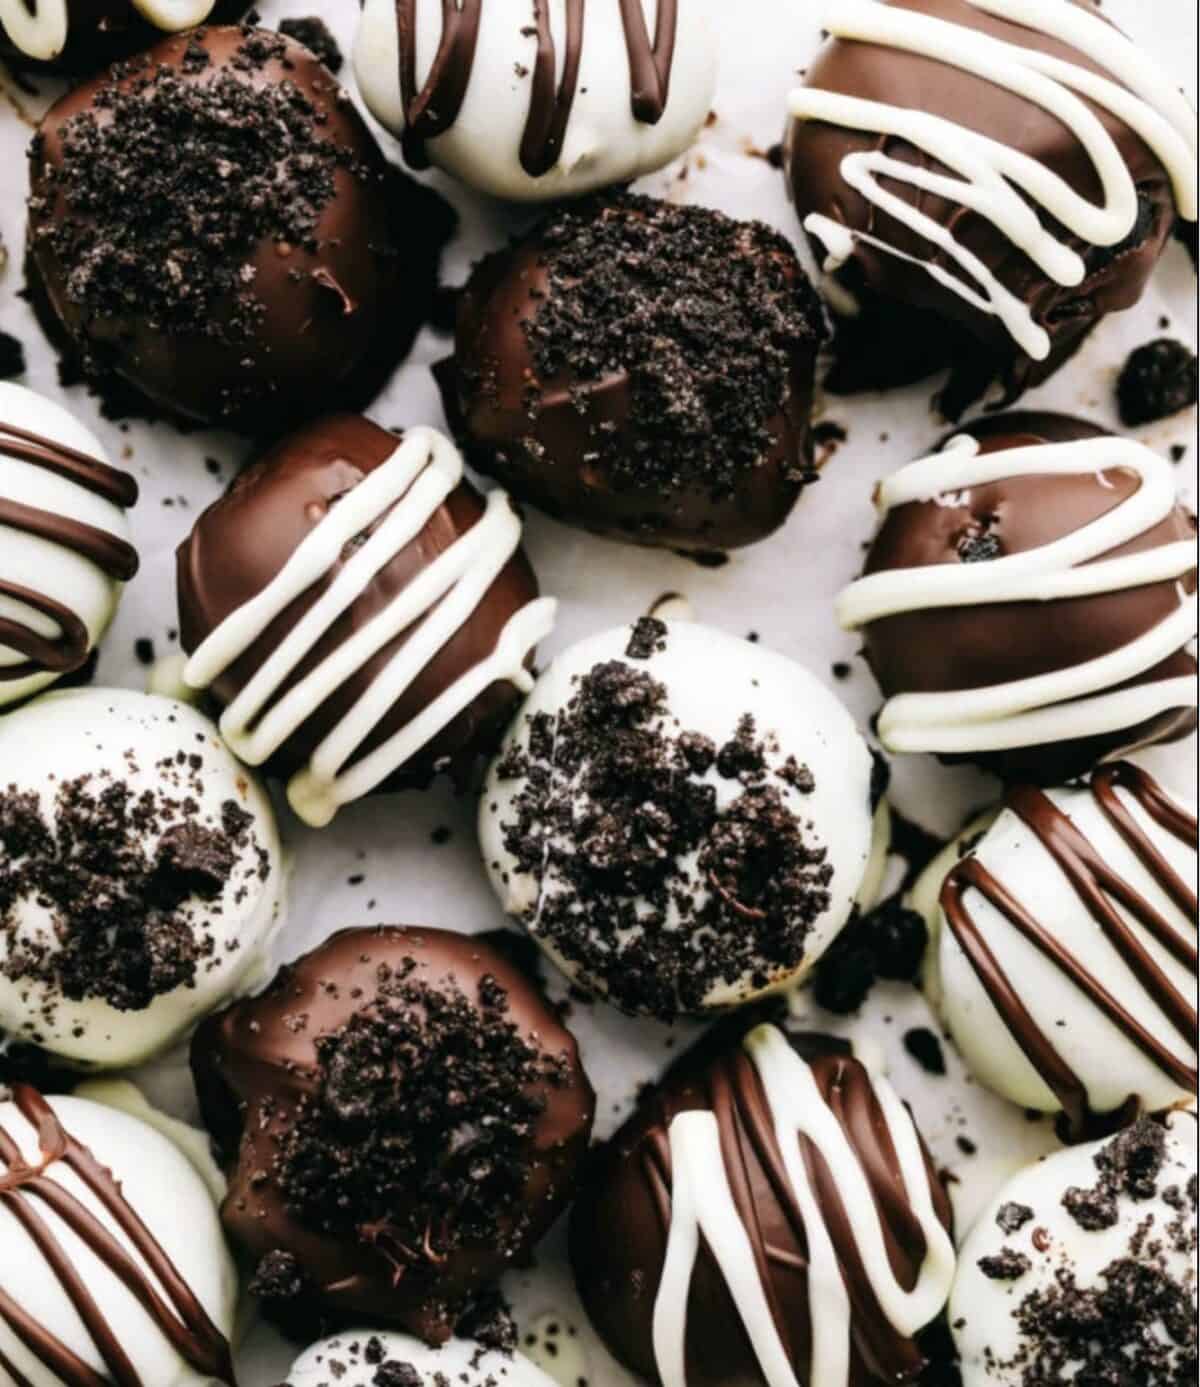 Close up view of the Oreo balls on a platter.